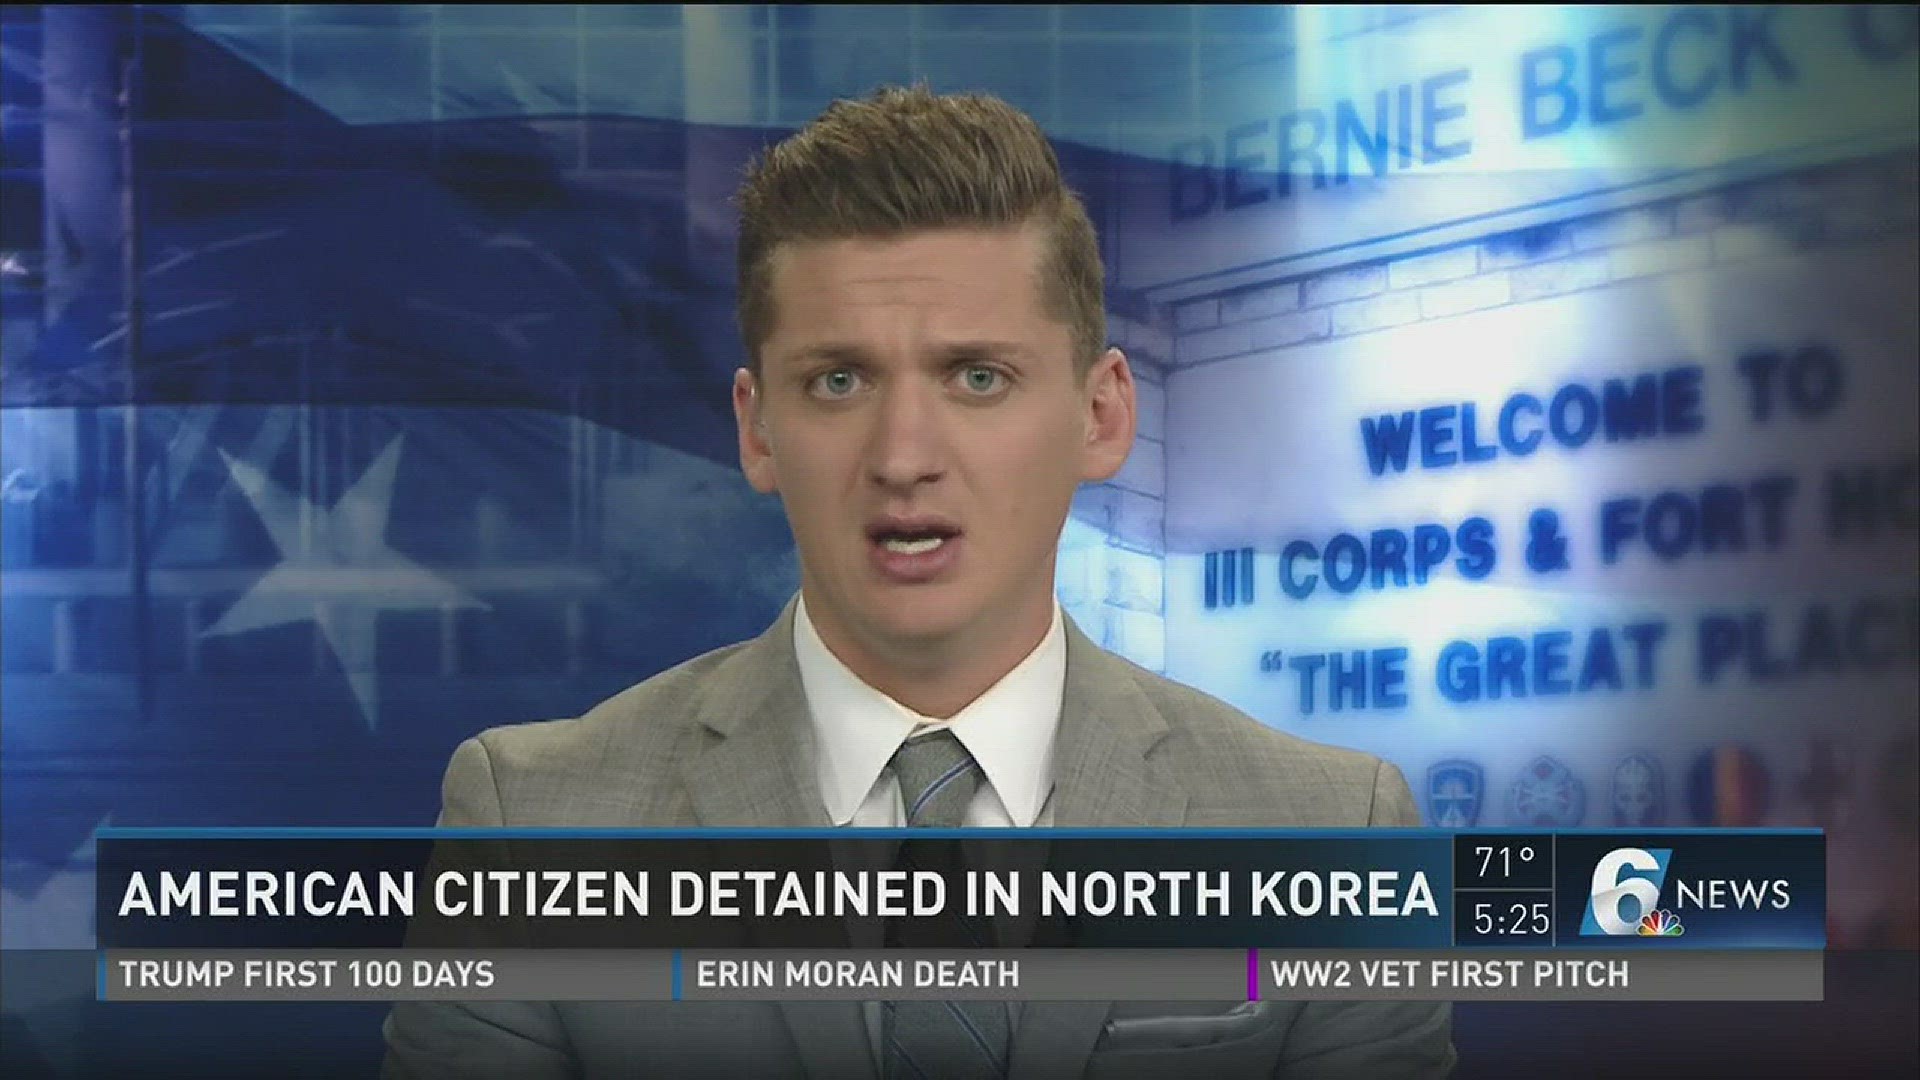 North Korea has detained a U.S. Citizen bring the total number of Americans being held to three.